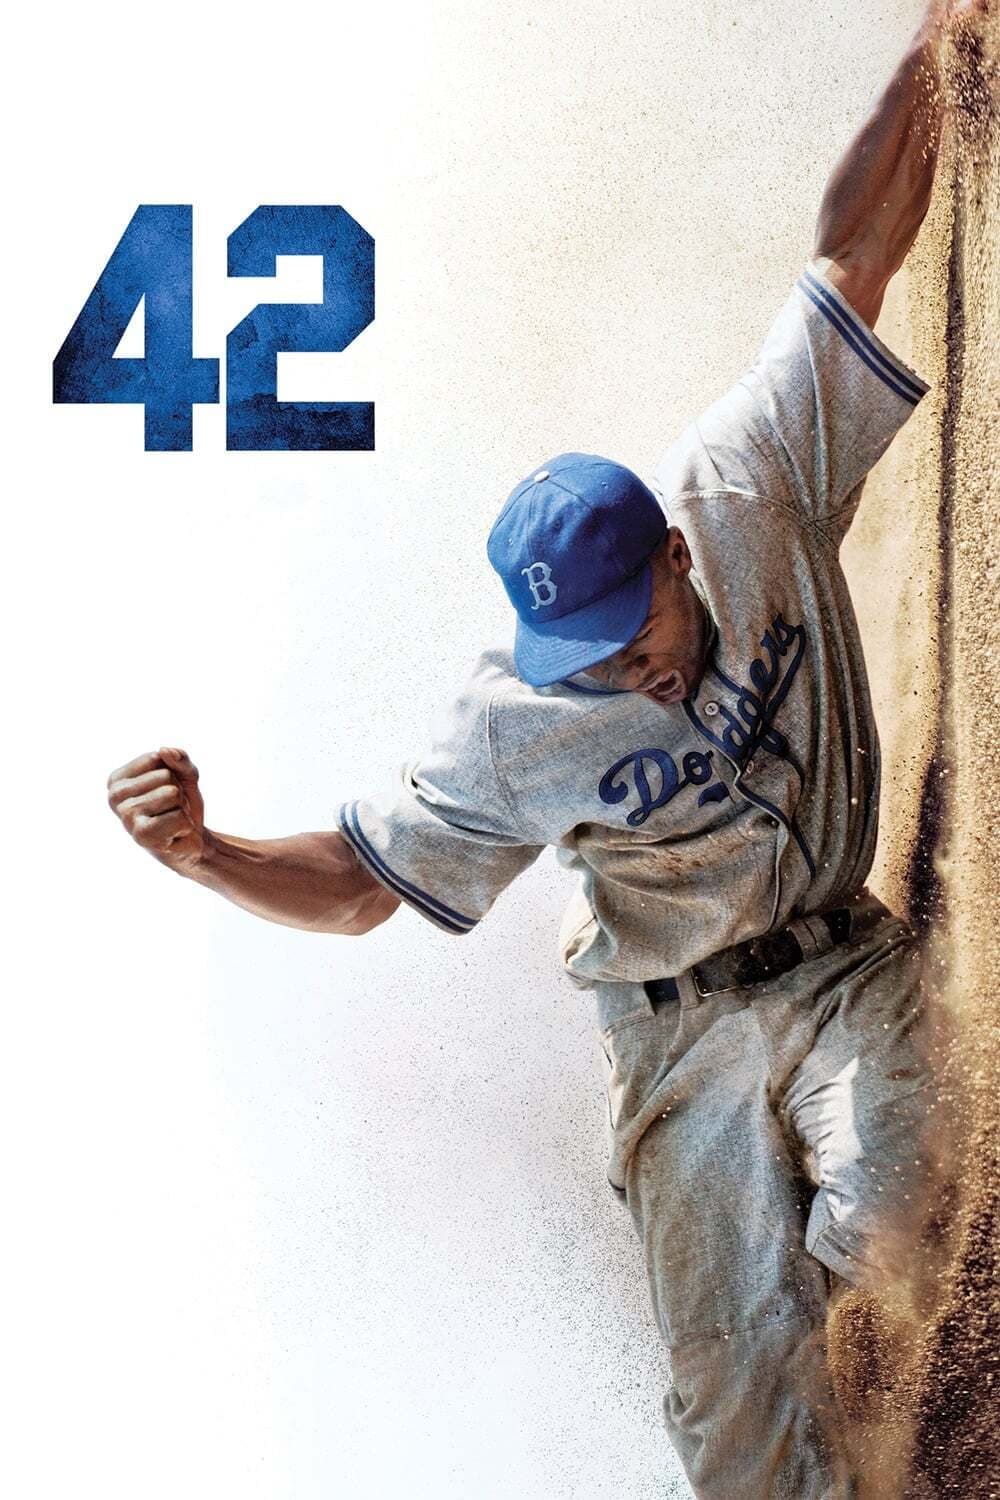 42 christian movie review